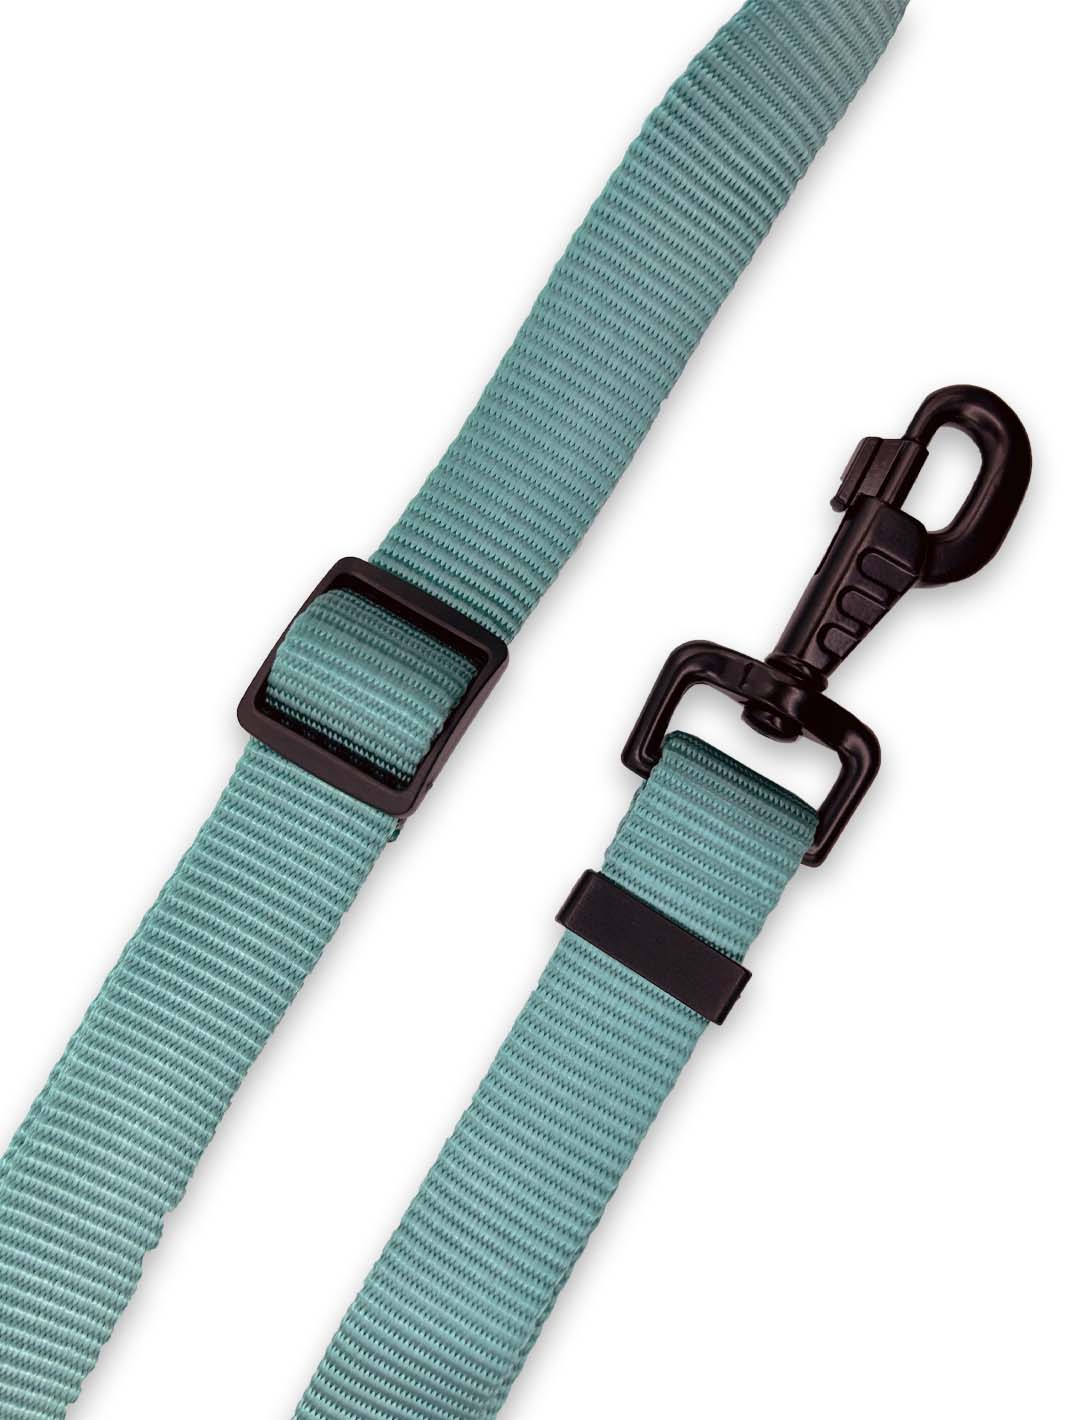 Pale teal nylon strap webbing dog leash clip by MAGNUS Canis.